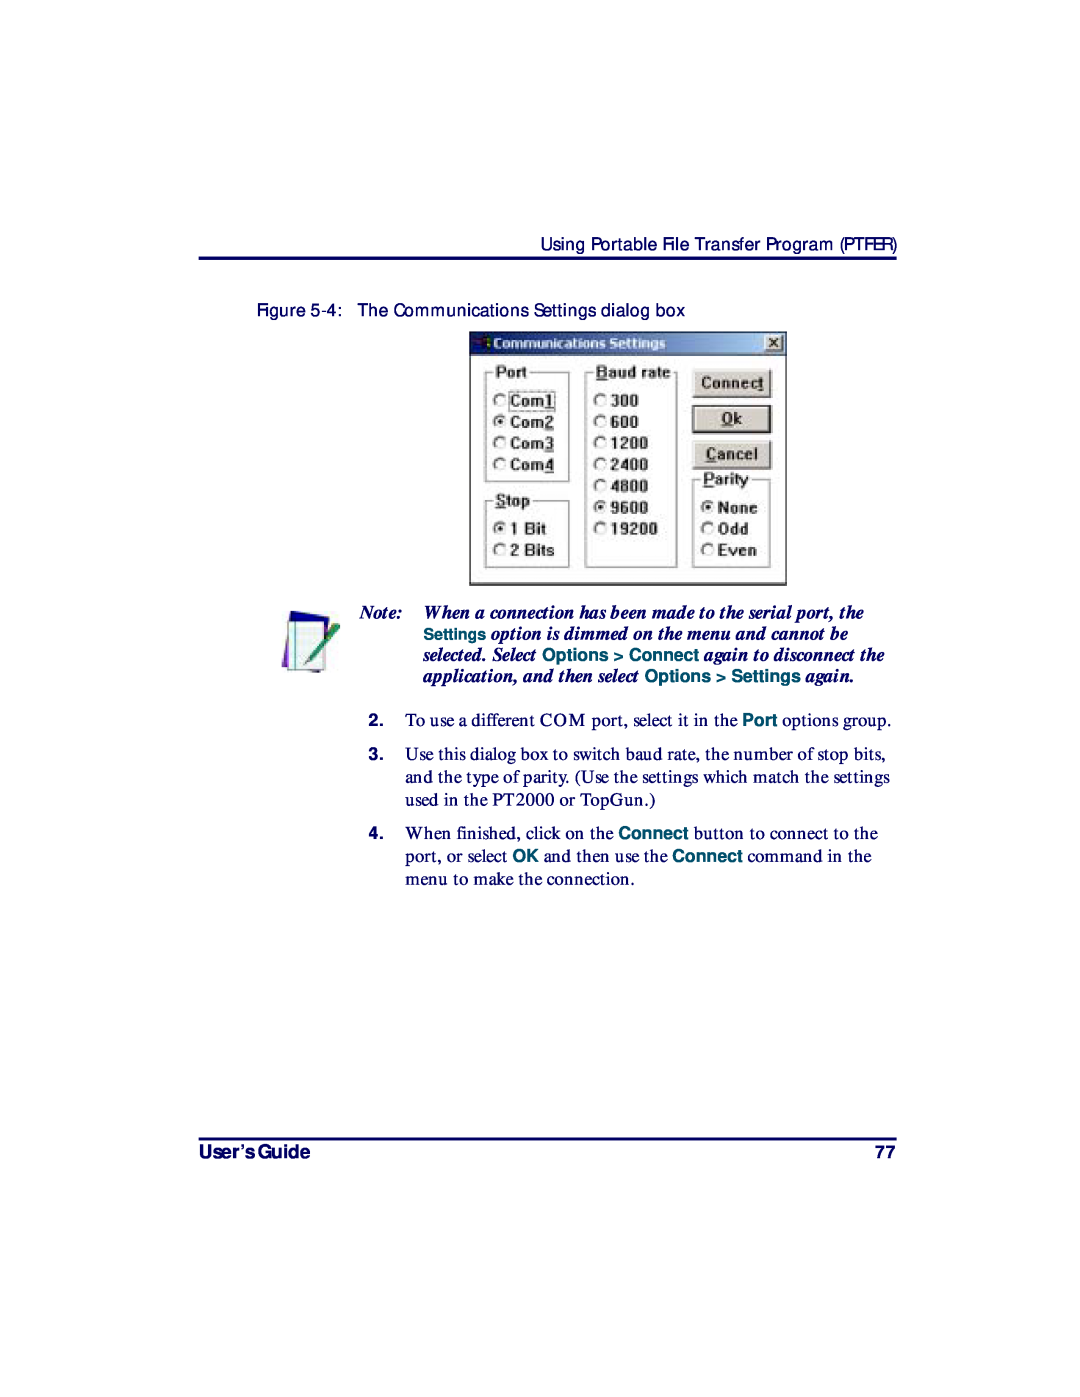 PSC PT2000, TopGun manual To use a different COM port, select it in the Port options group, User’s Guide 